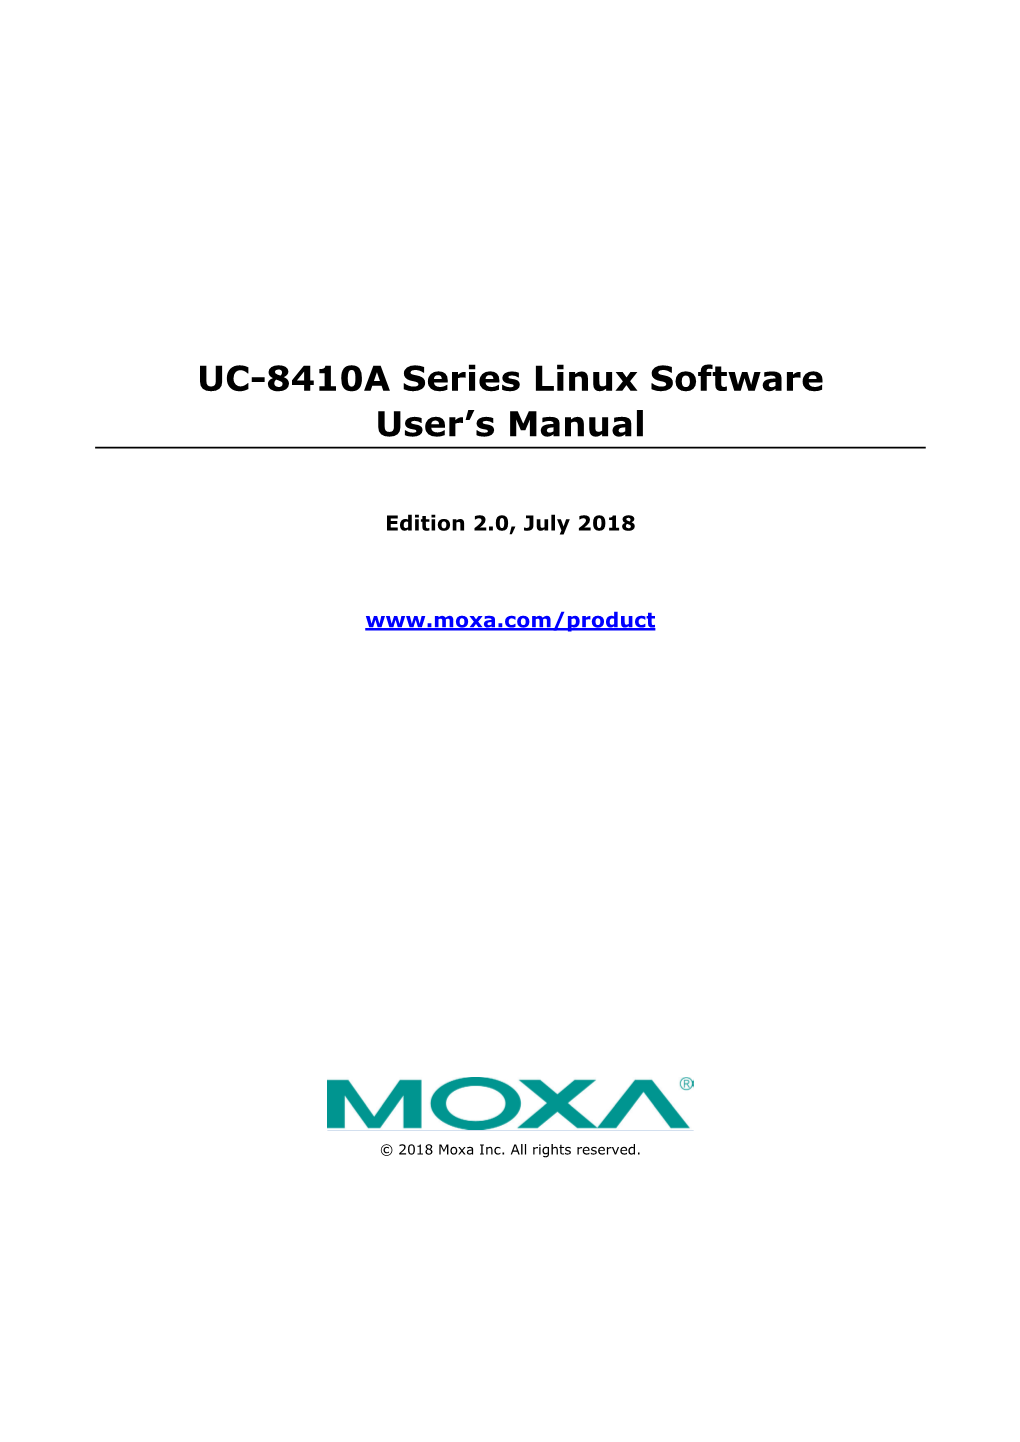 UC-8410A Series Linux Software User's Manual